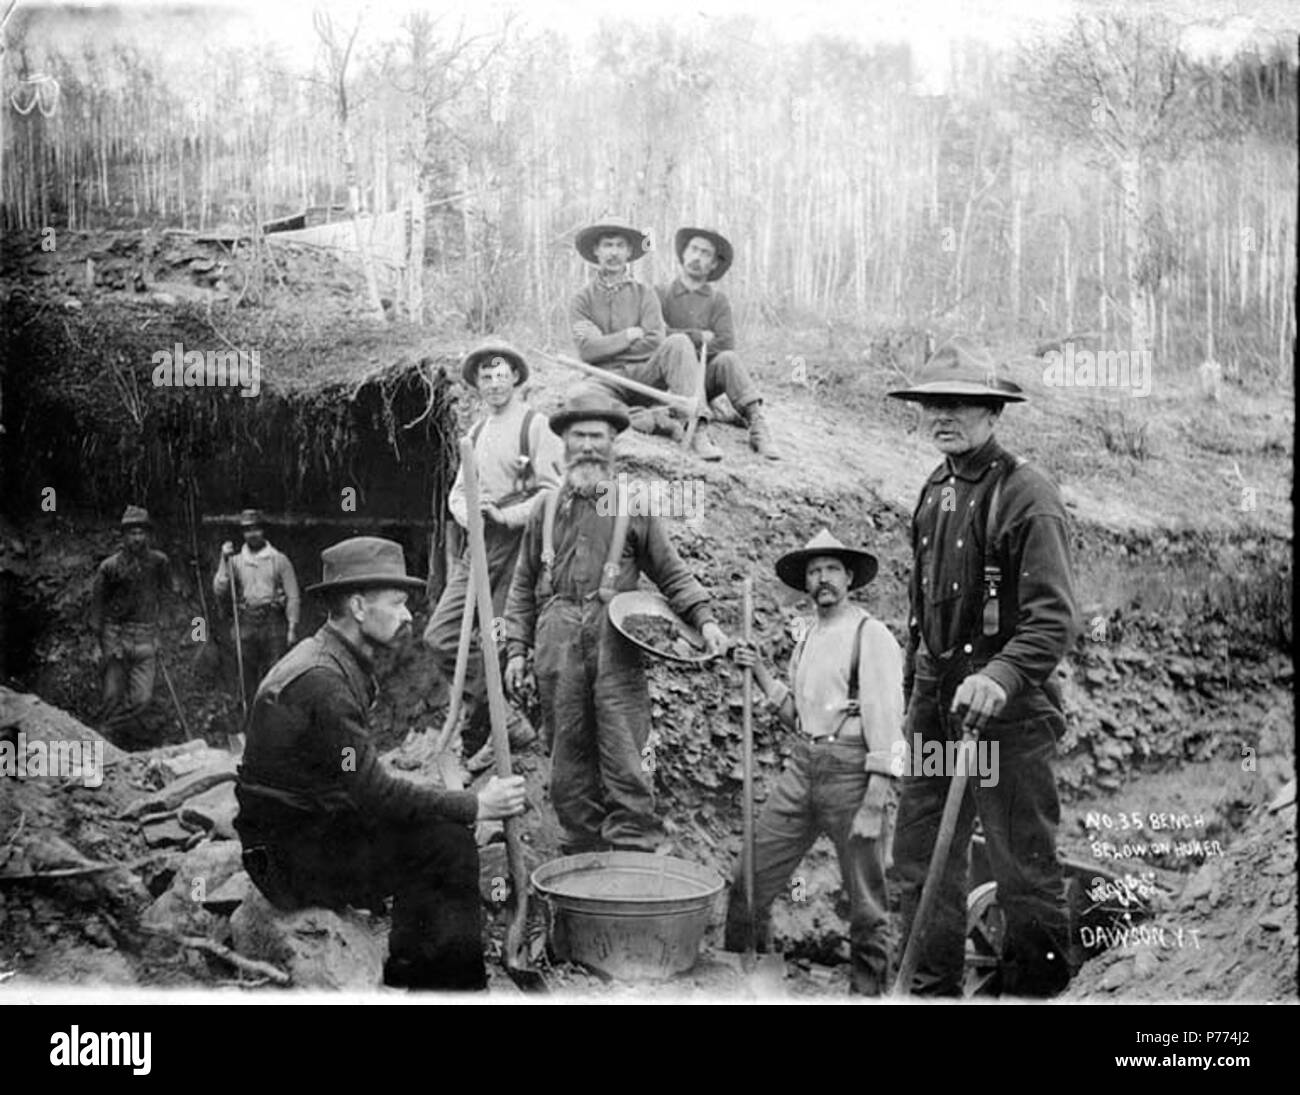 . English: Miners working the No. 35 bench claim below Hunker Creek, Yukon Territory, ca. 1898. English: Shows men with pickaxes, shovels and gold pan. The man in the foreground on the right is Desire Bourbonnais of Montreal Quebec . Caption on image: 'No. 35 Bench below Huner' Klondike Gold Rush. Subjects (LCTGM): Gold miners--Yukon--Hunker Creek; Gold mining--Yukon--Hunker Creek; Yukon--Gold discoveries  . circa 1898 9 Miners working the No 35 bench claim below Hunker Creek, Yukon Territory, ca 1898 (HEGG 155) Stock Photo